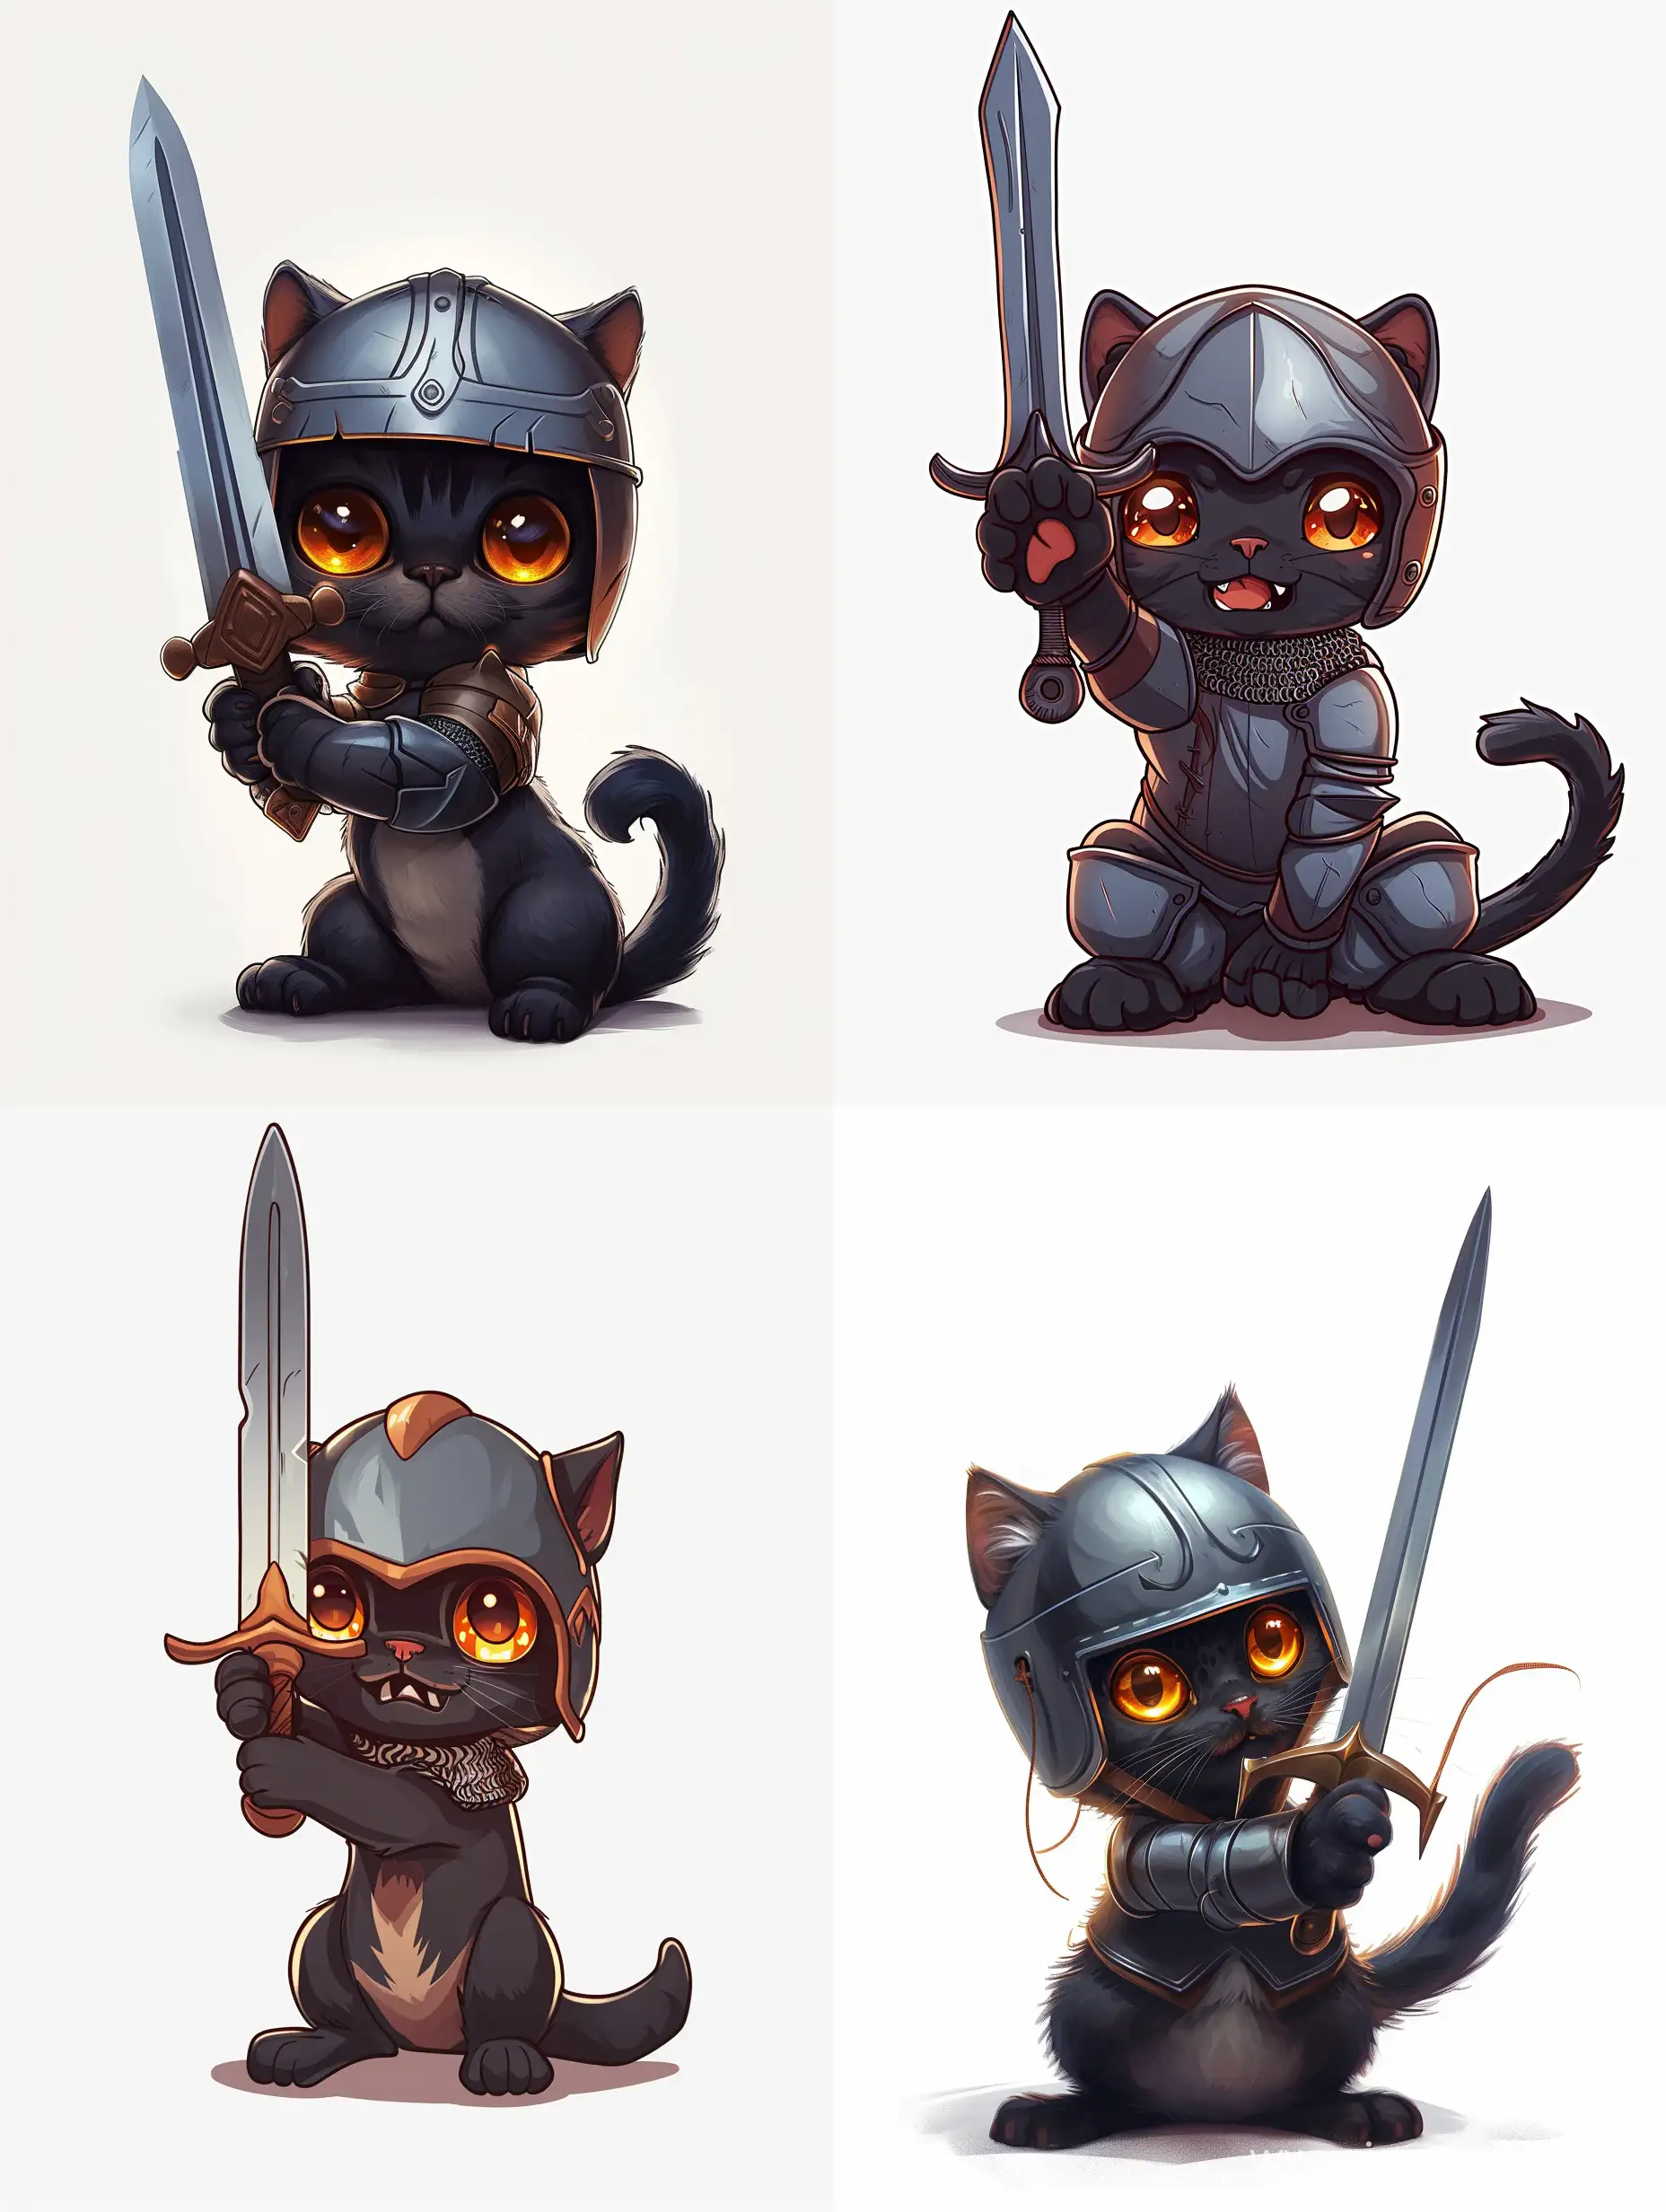 Cute little cat knight sailor, with amber eyes that shimmer beautifully, with a knight's helmet and a sword in his paw raised up,shows that he is ready to attack with a battle cry, the color of the cat is black with a small white spot on his neck, hd, png, white background, cartoon, 2D, minimalism